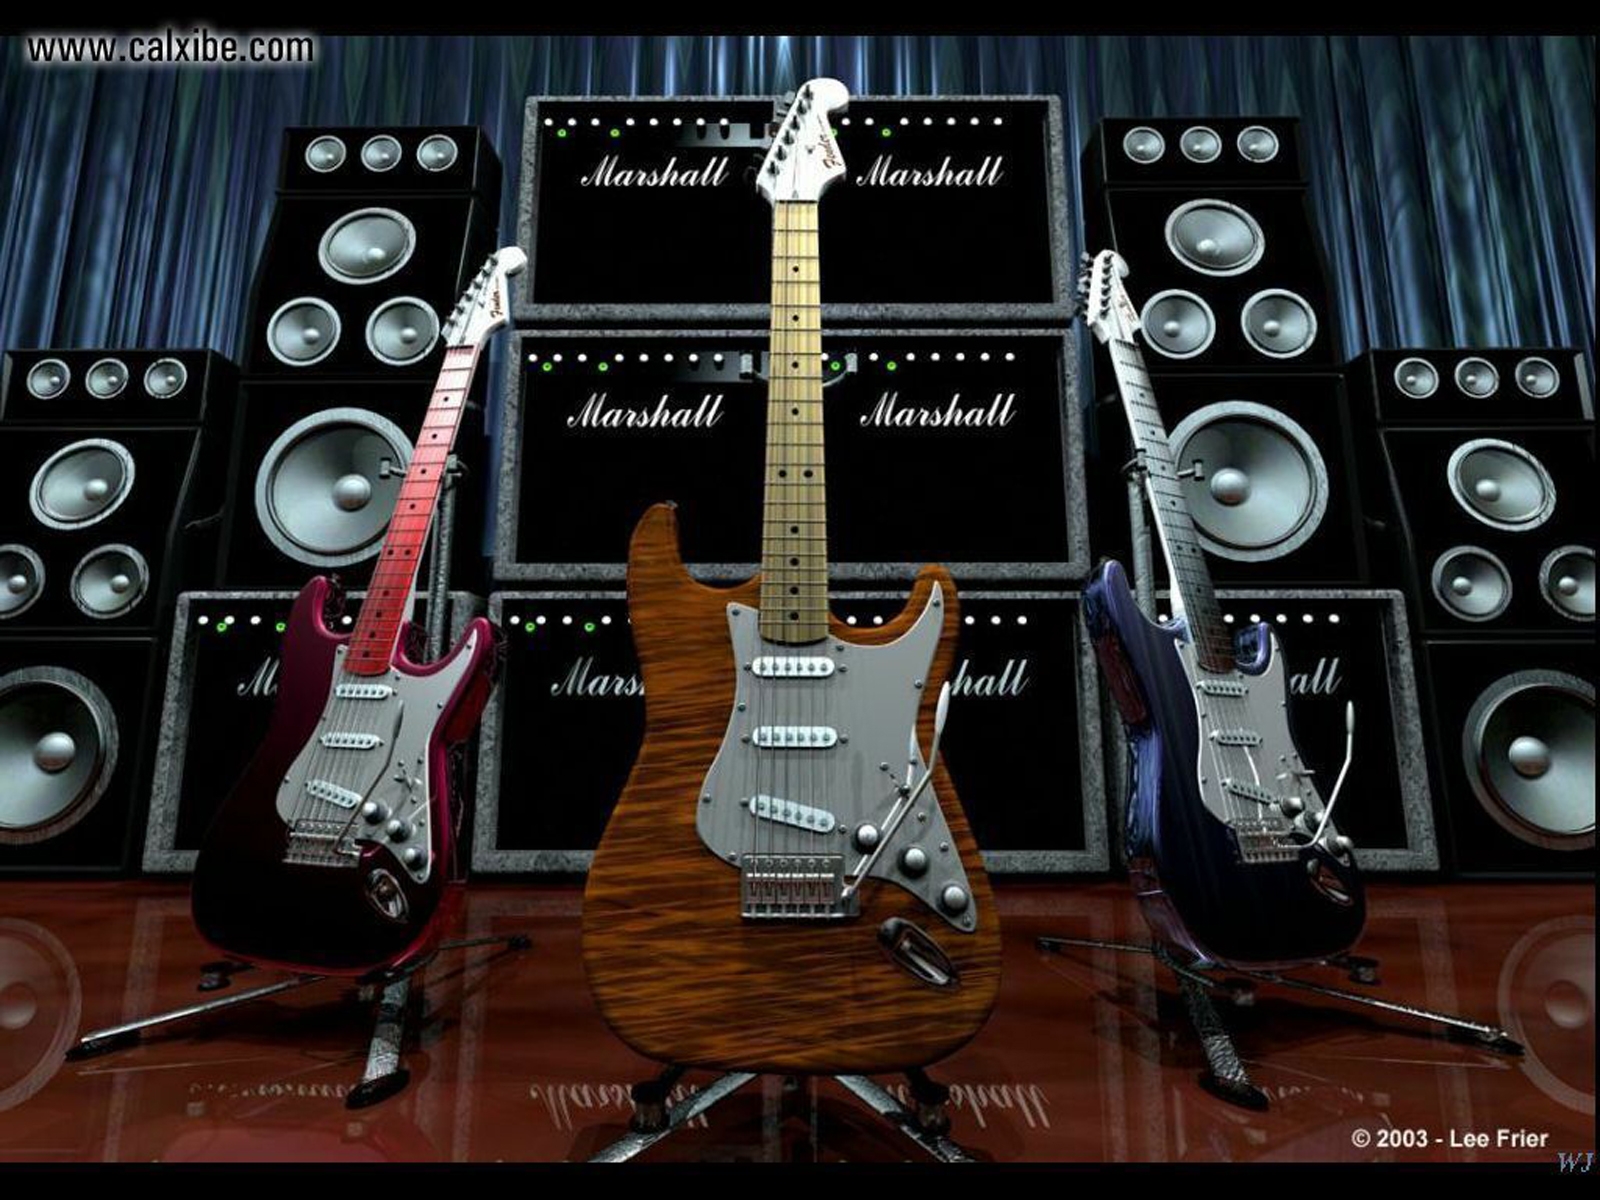 71 Marshall Speaker Stock Video Footage - 4K and HD Video Clips |  Shutterstock